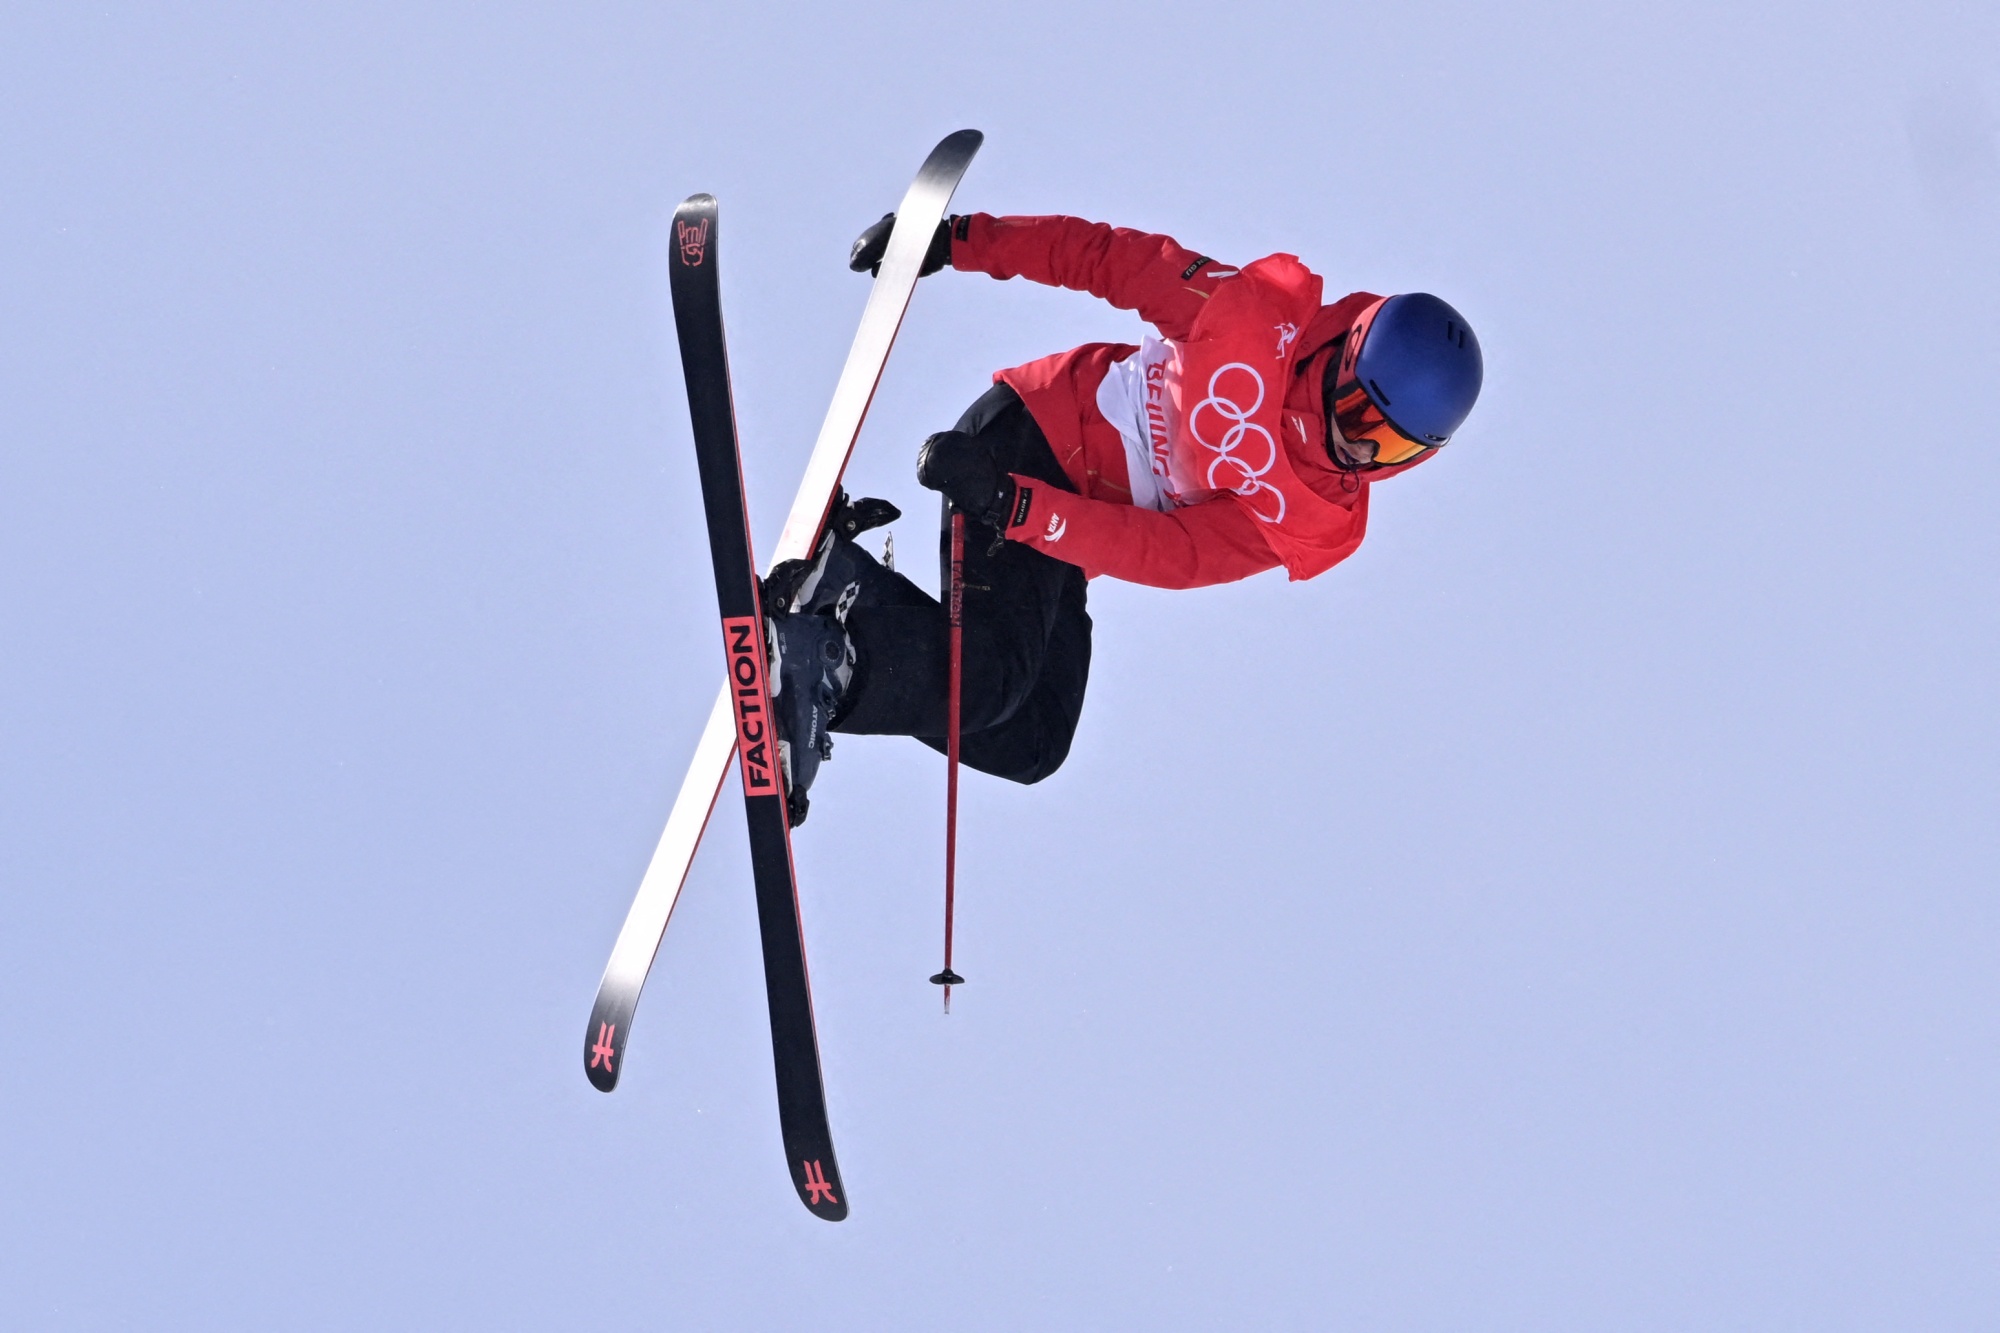 Winter Olympics: Eileen Gu wins gold in big air freestyle skiing